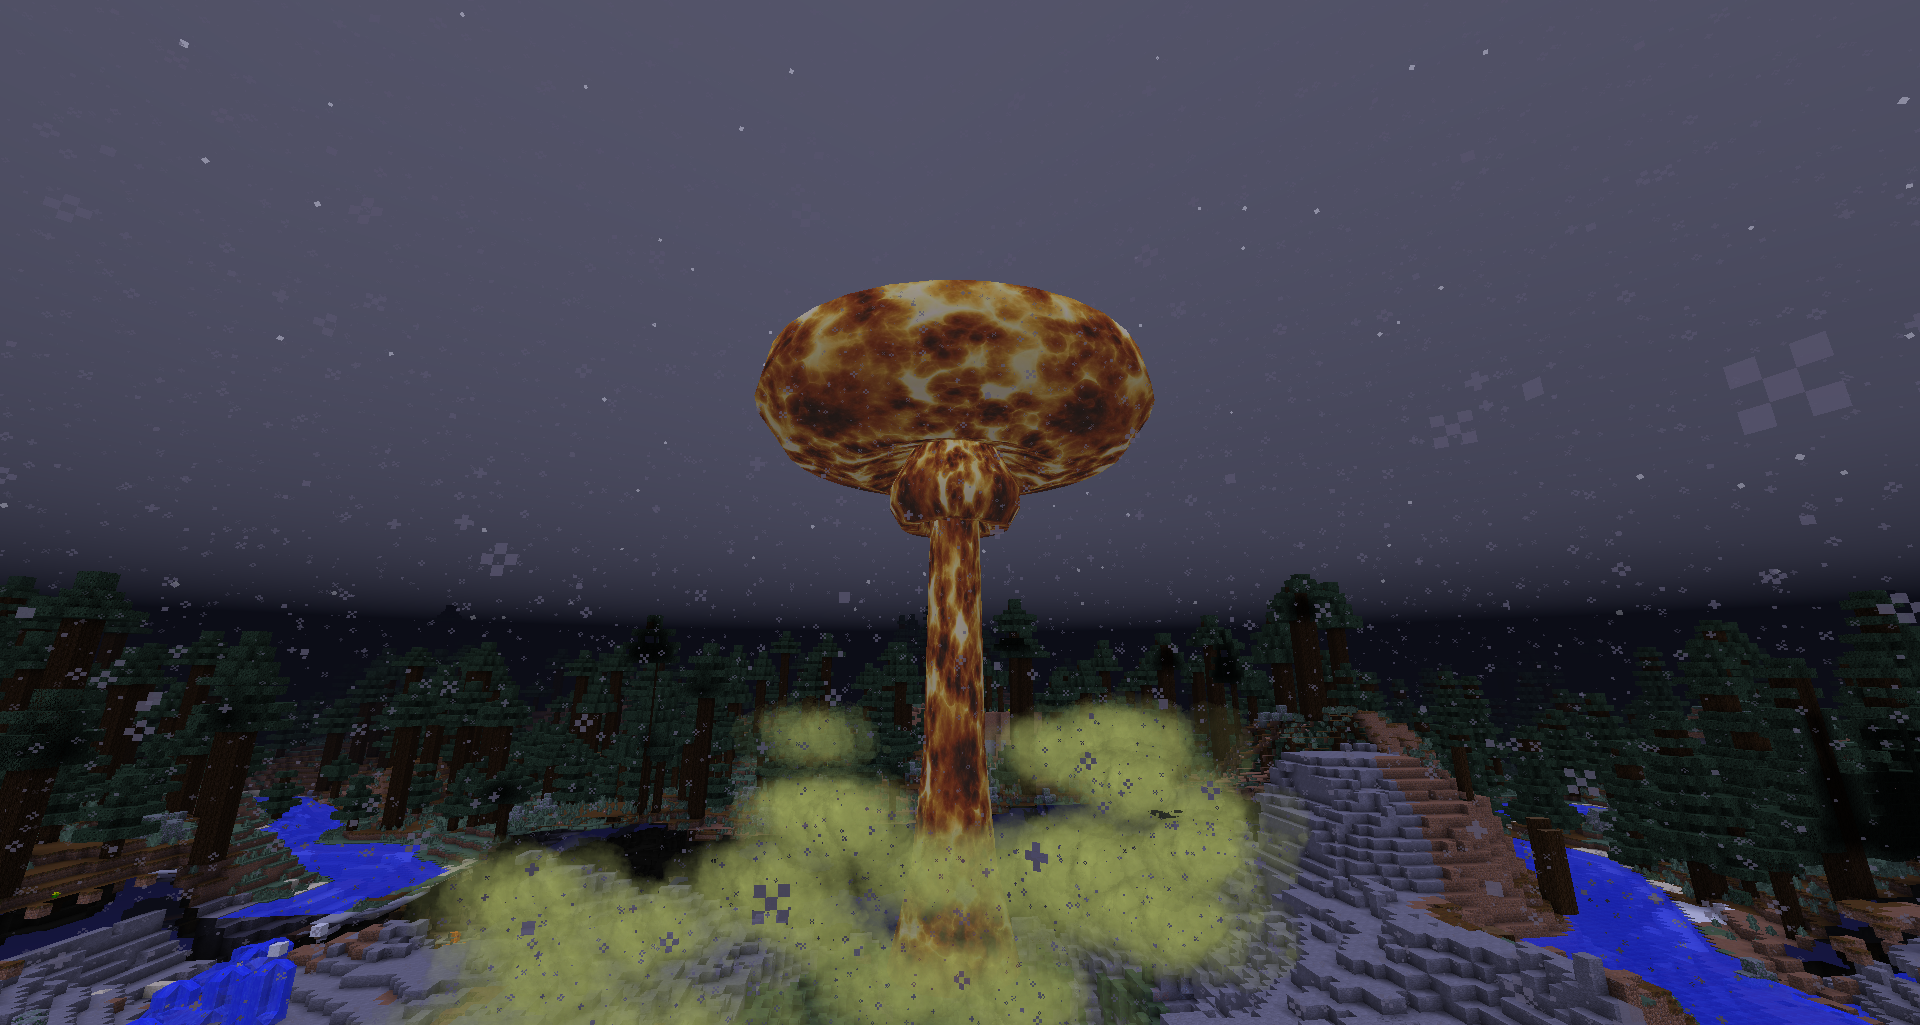 Your average nuclear explosion